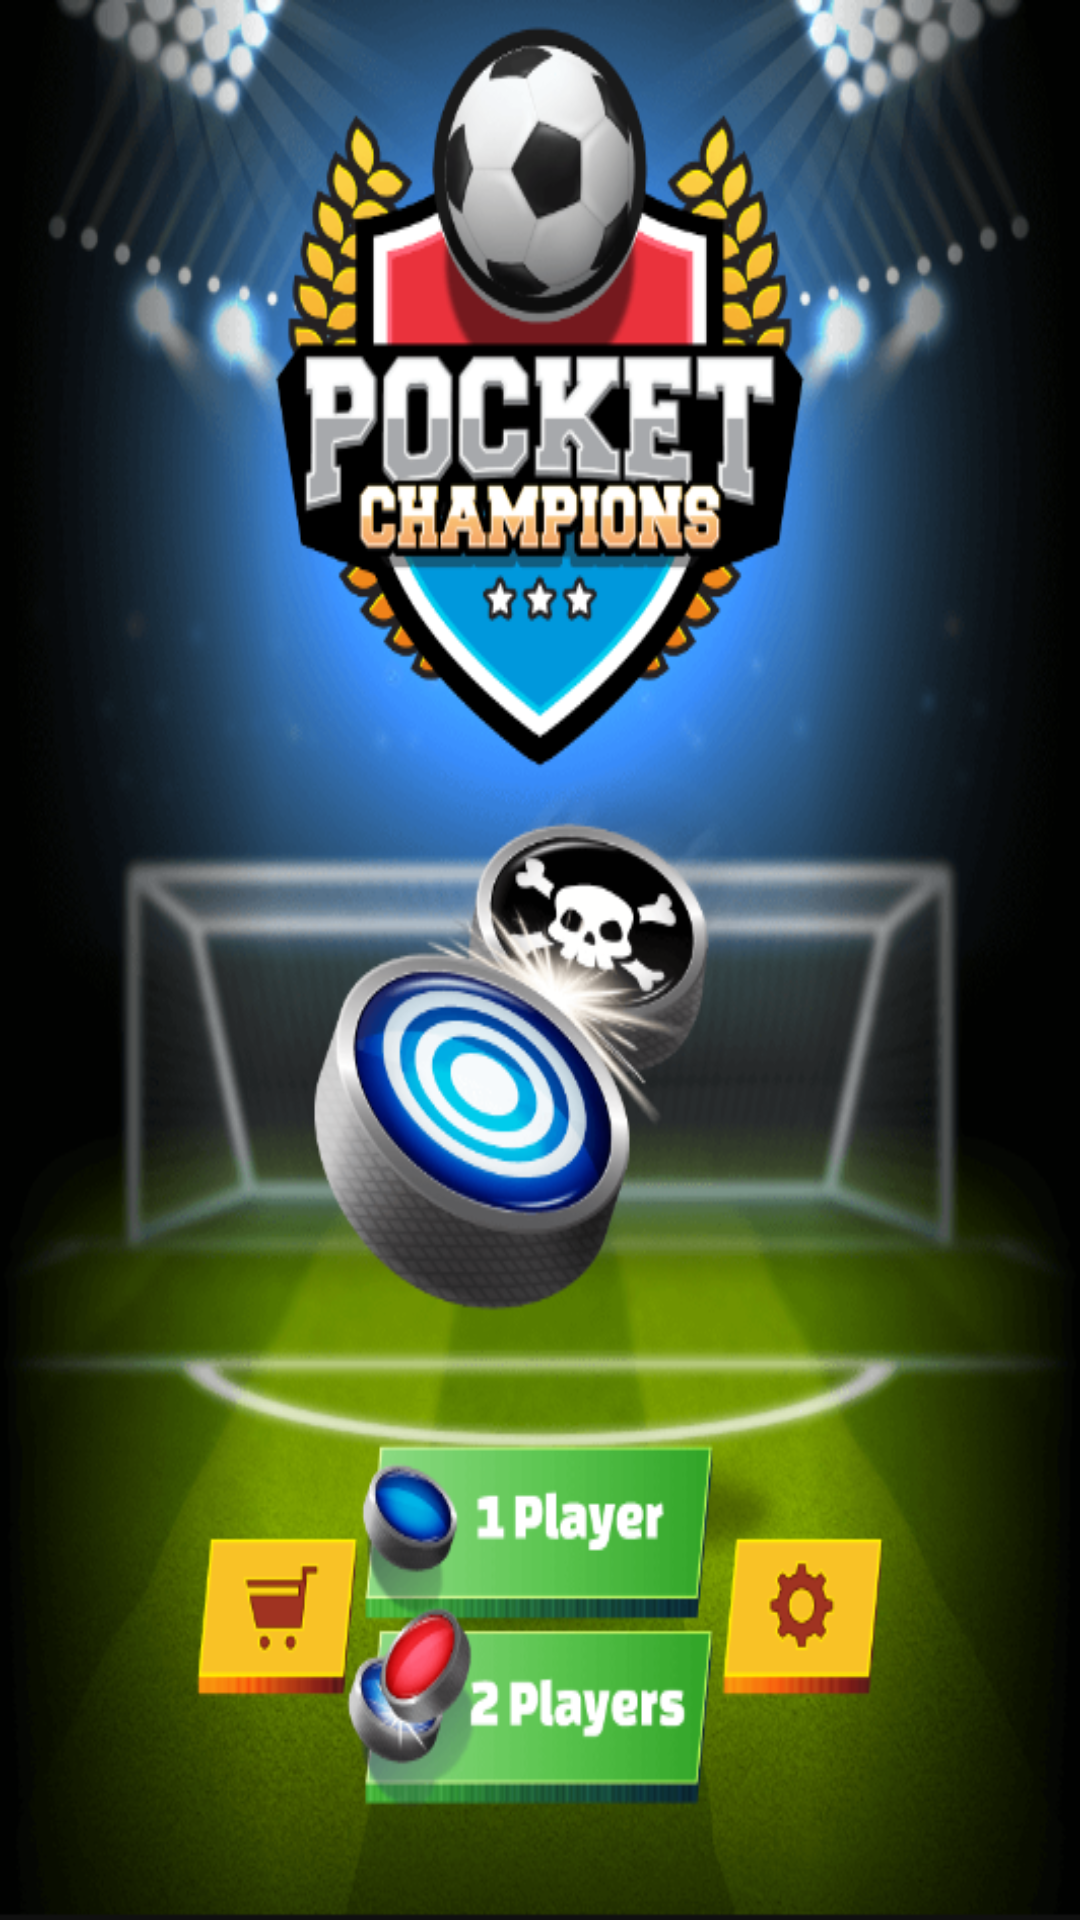 Champion Soccer Star - APK Download for Android